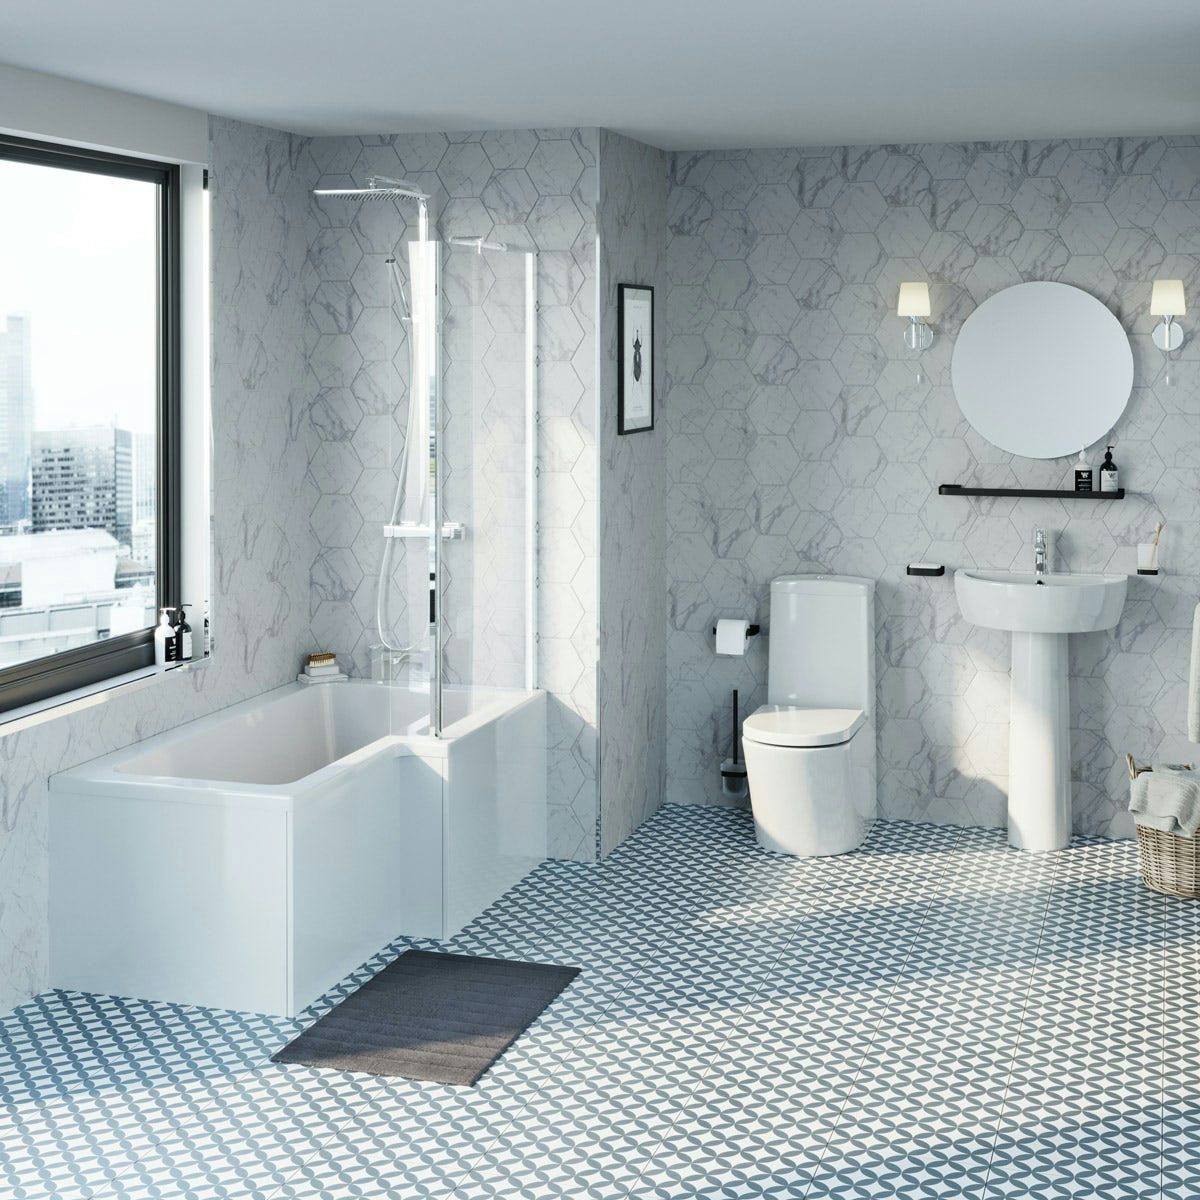 Mode Tate bathroom suite with right hand bath, shower and taps